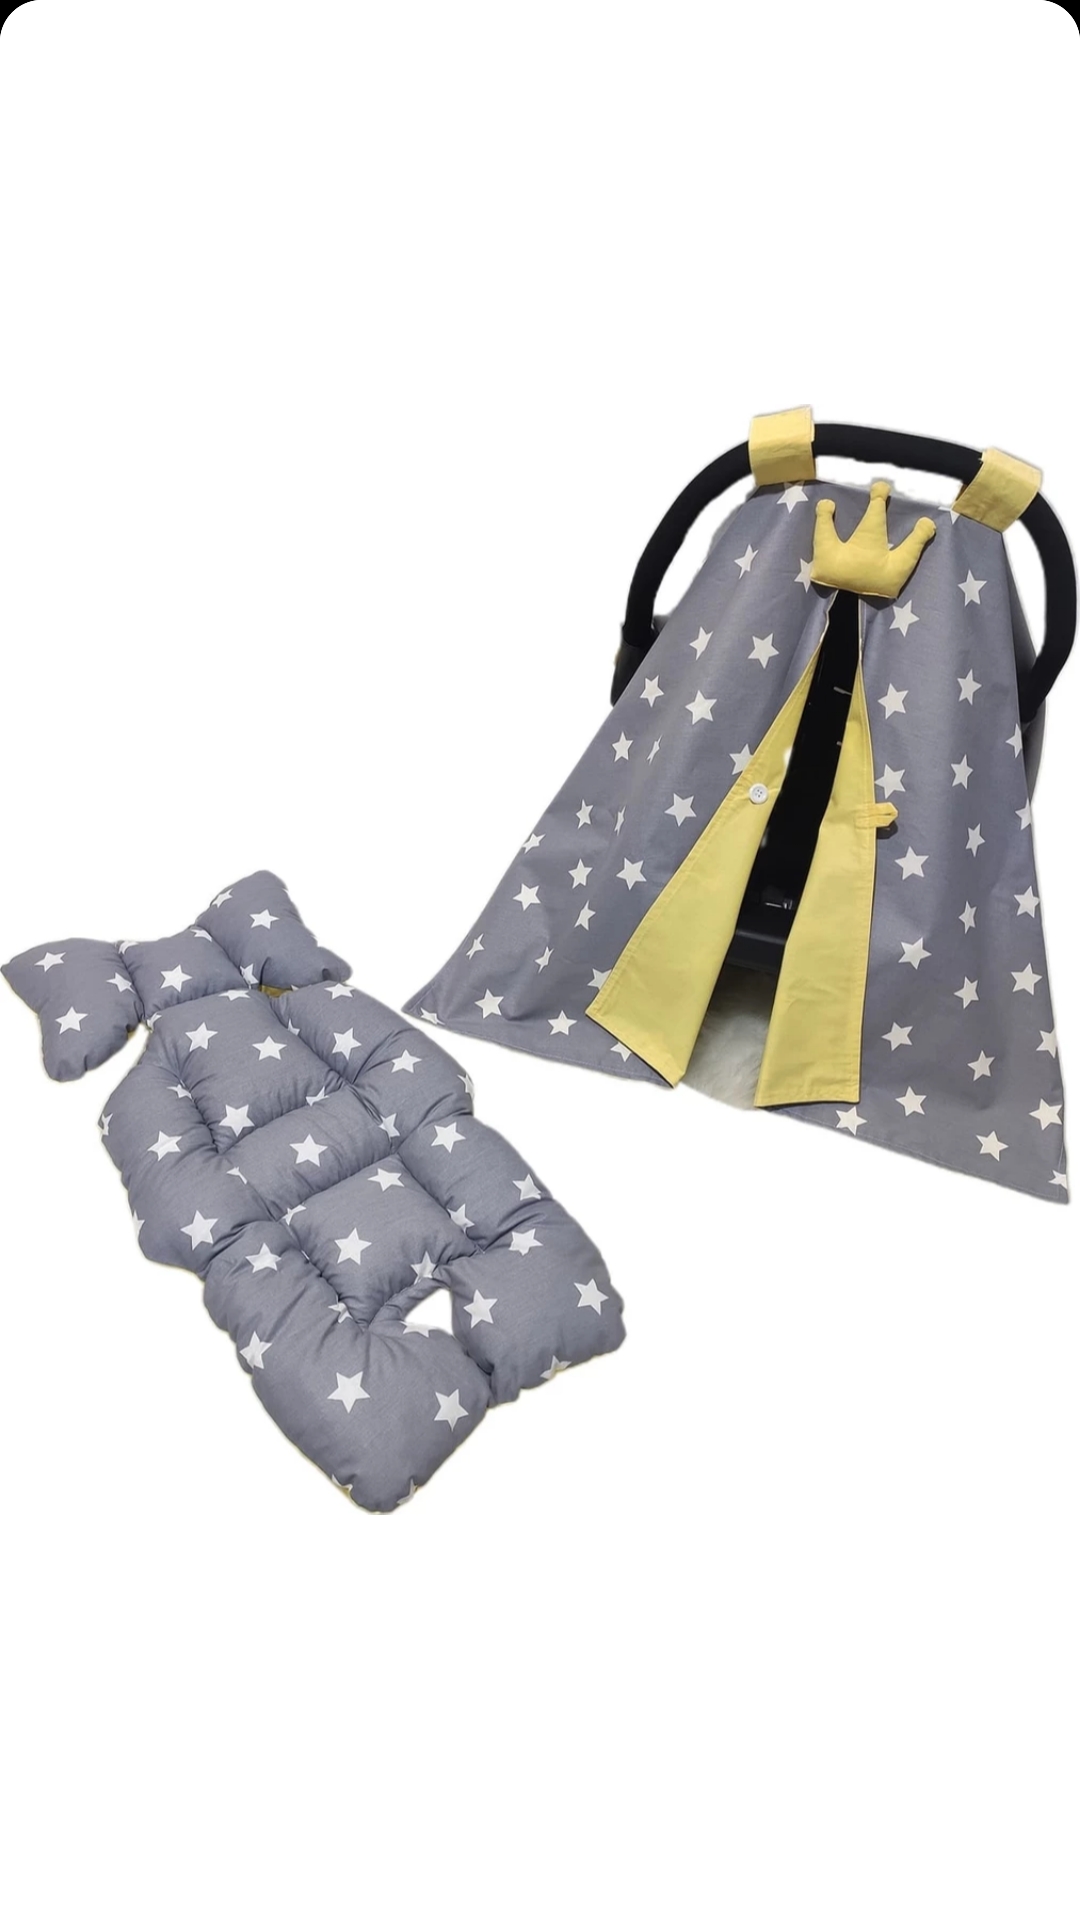 Stroller Cover and Inner Pillow Yellow-Grey